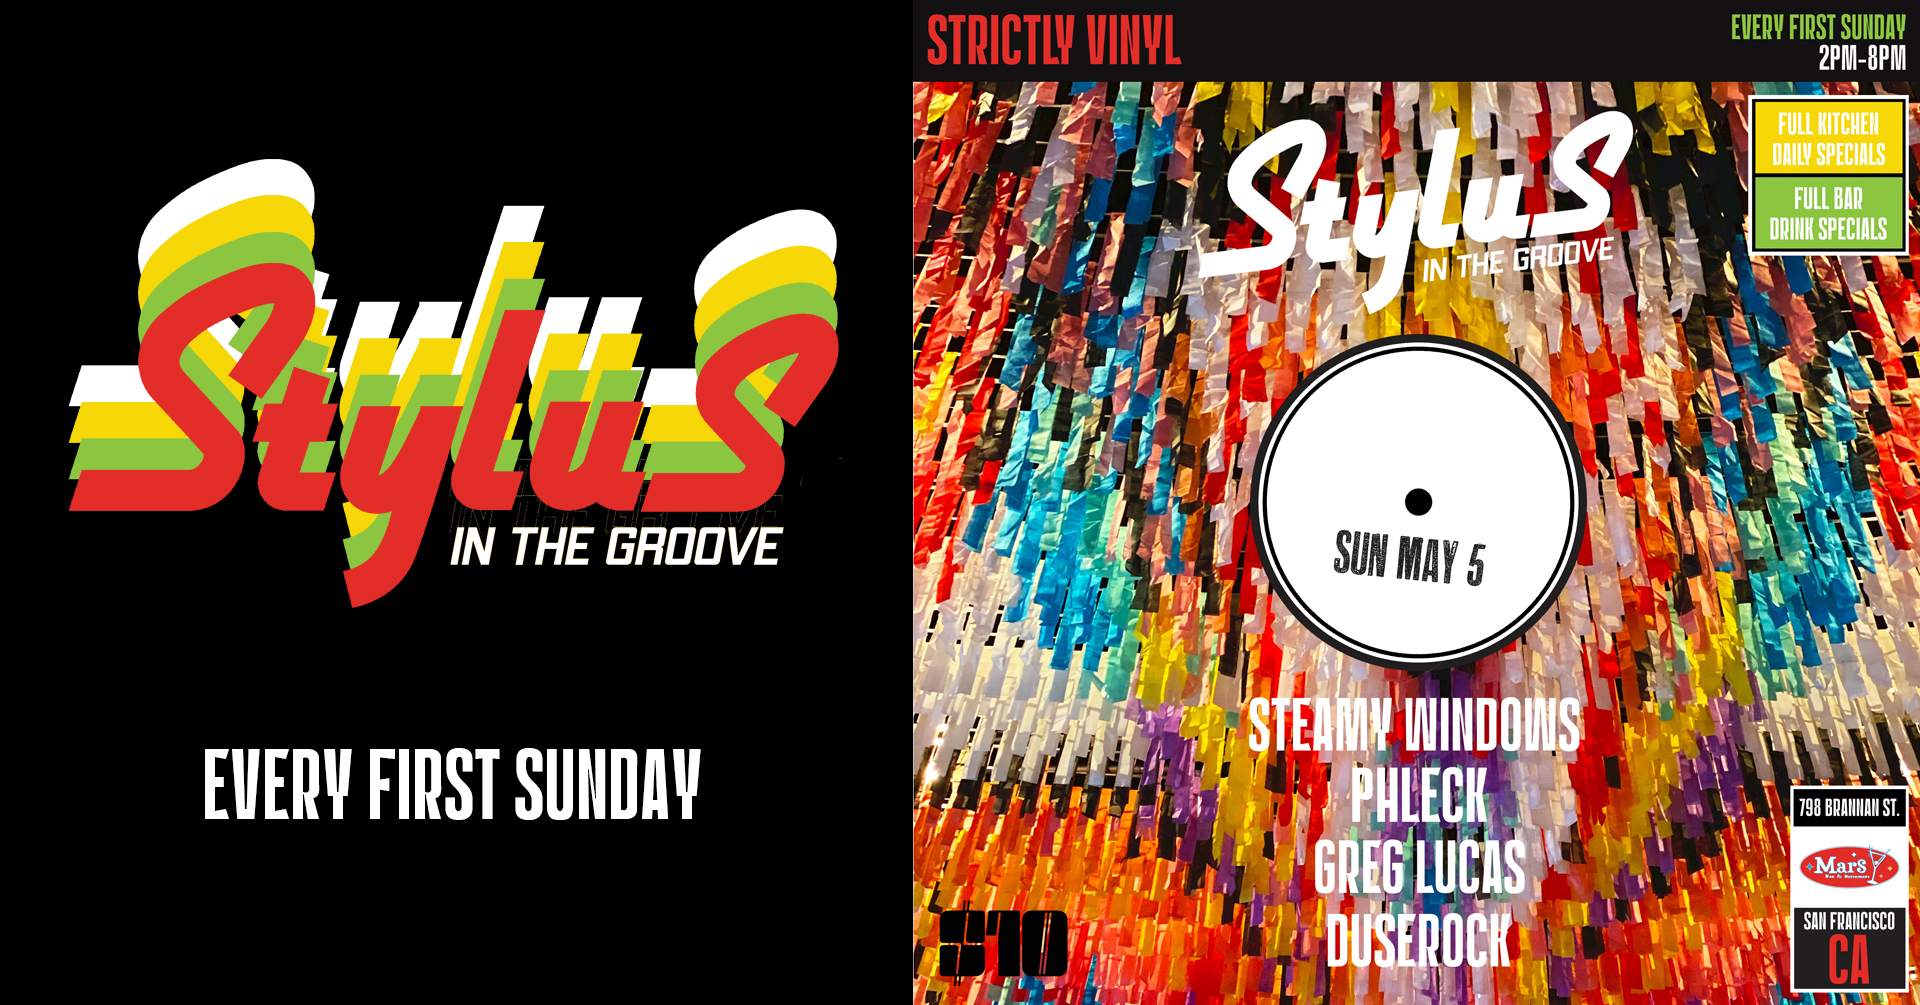 Stylus In The Groove with Steamy Windows, Phleck & Greg Lucas - フライヤー表